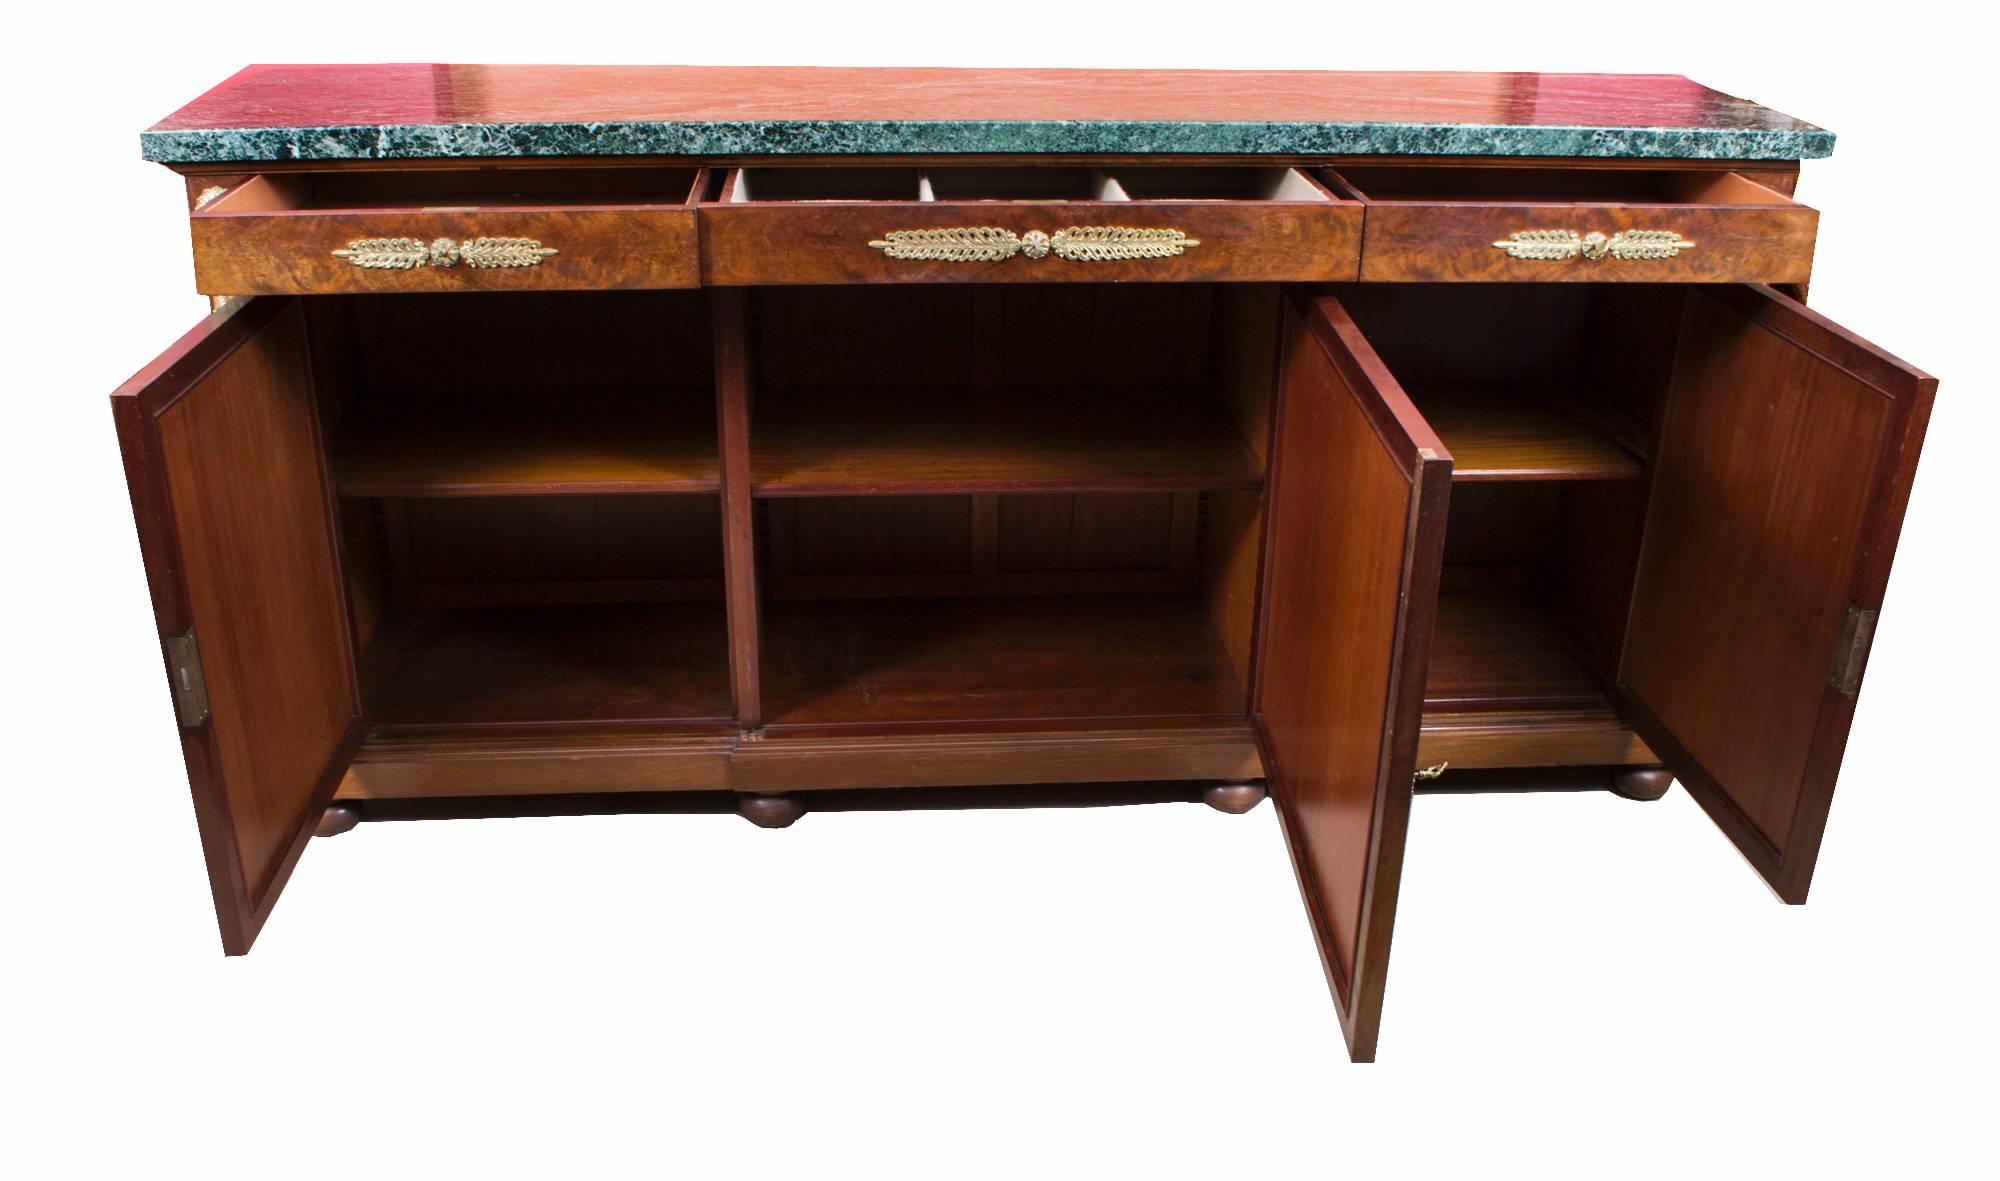 This is an exceptional antique Empire style and ormolu-mounted marble topped breakfront sideboard, circa 1880 in date, with room for all your plates, china, glassware and cutlery.

It has three useful and capacious drawers in the frieze, the